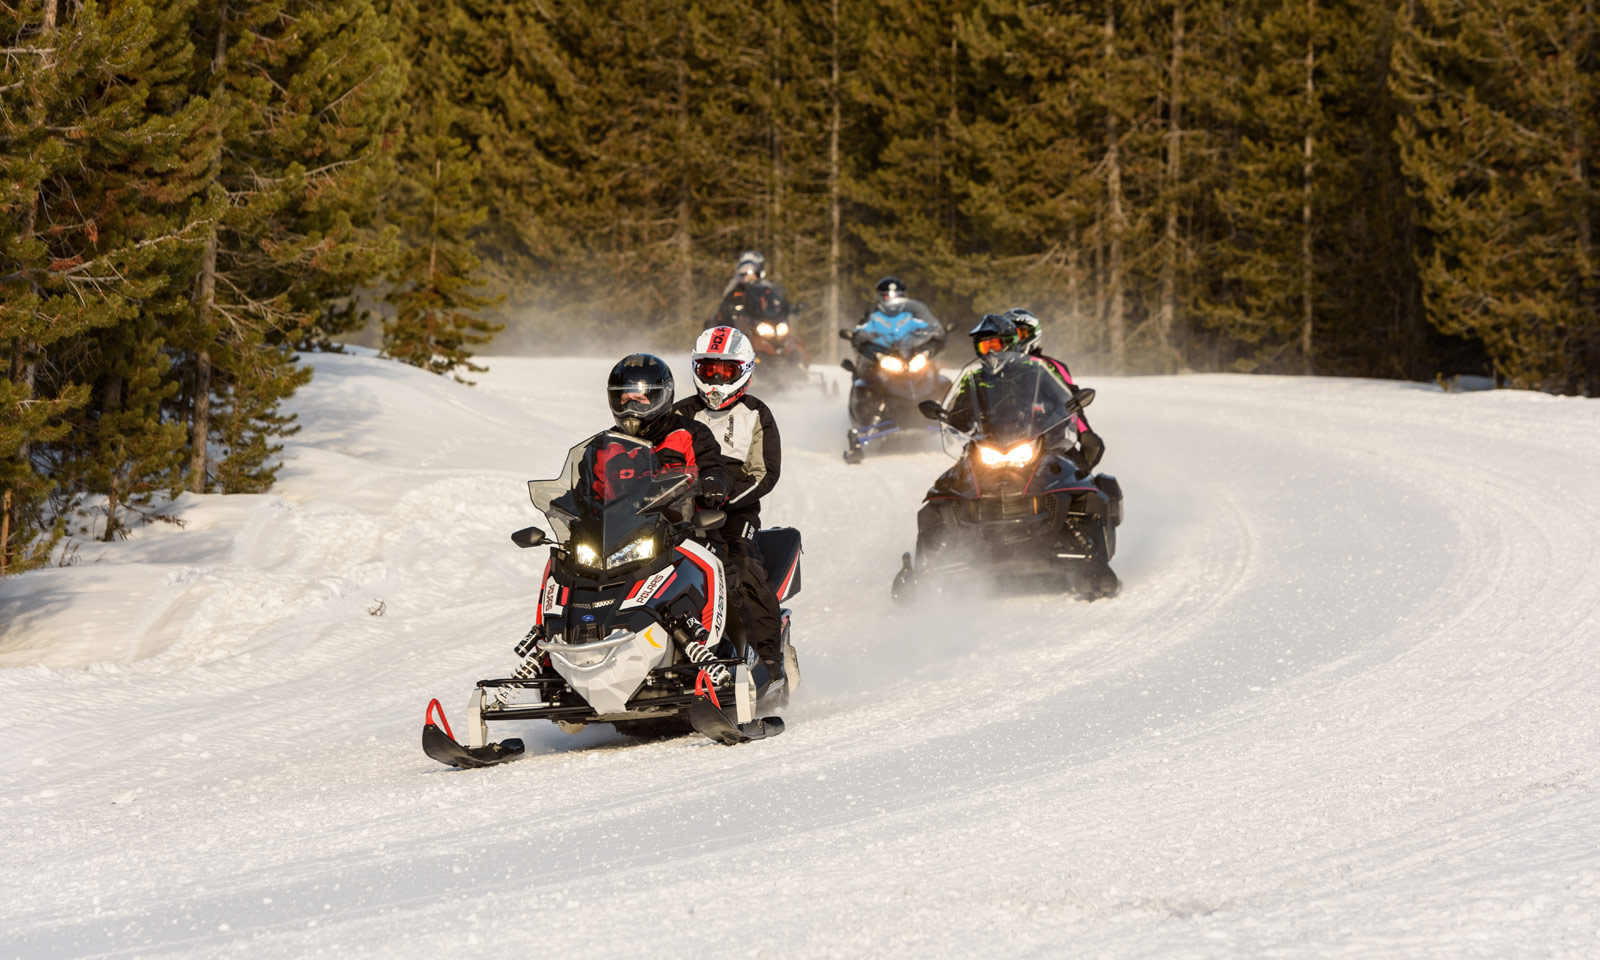 Snowmobiler riding with passenger on trail